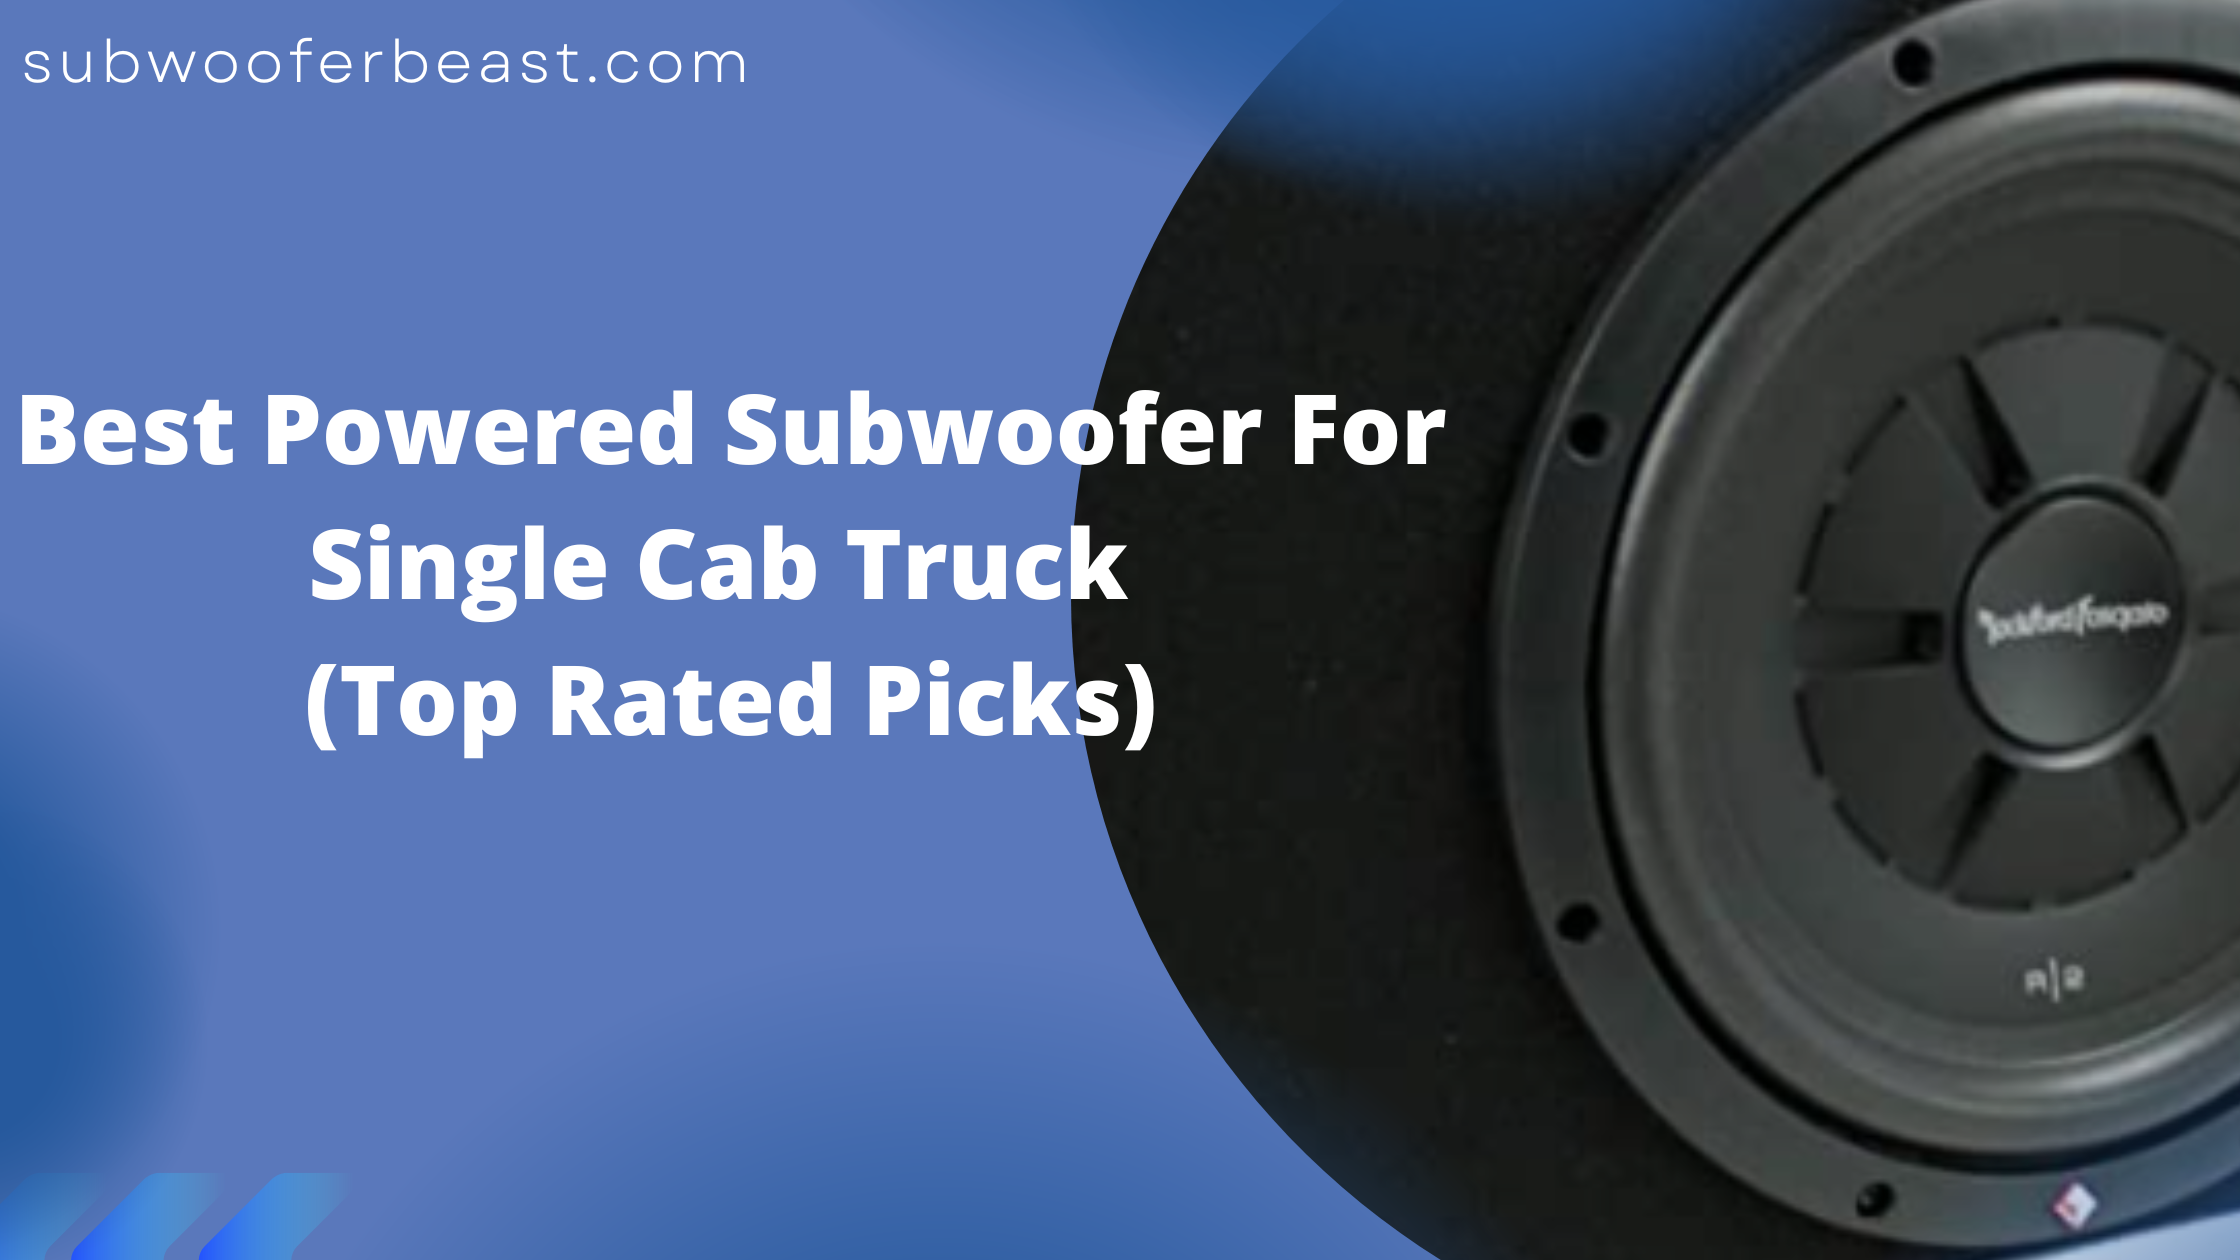 Best Powered Subwoofer For Single Cab Truck